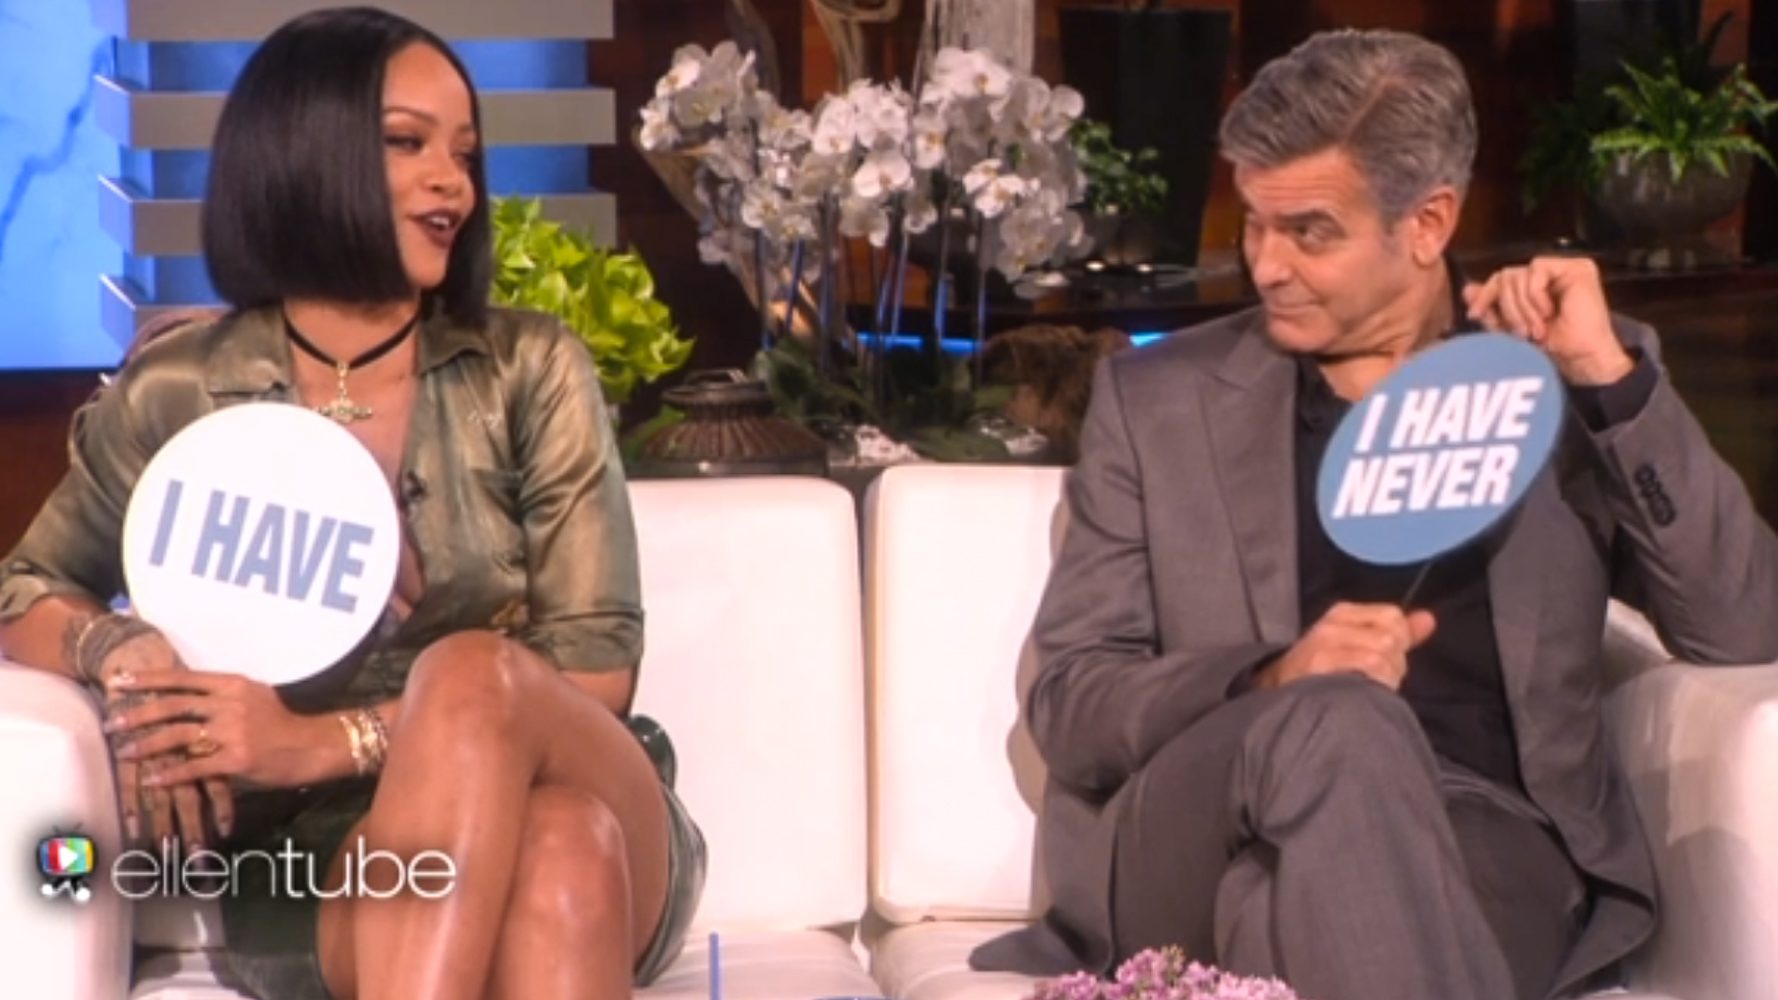 WATCH: Rihanna, George Clooney play ‘Never have I ever’ on ‘Ellen’